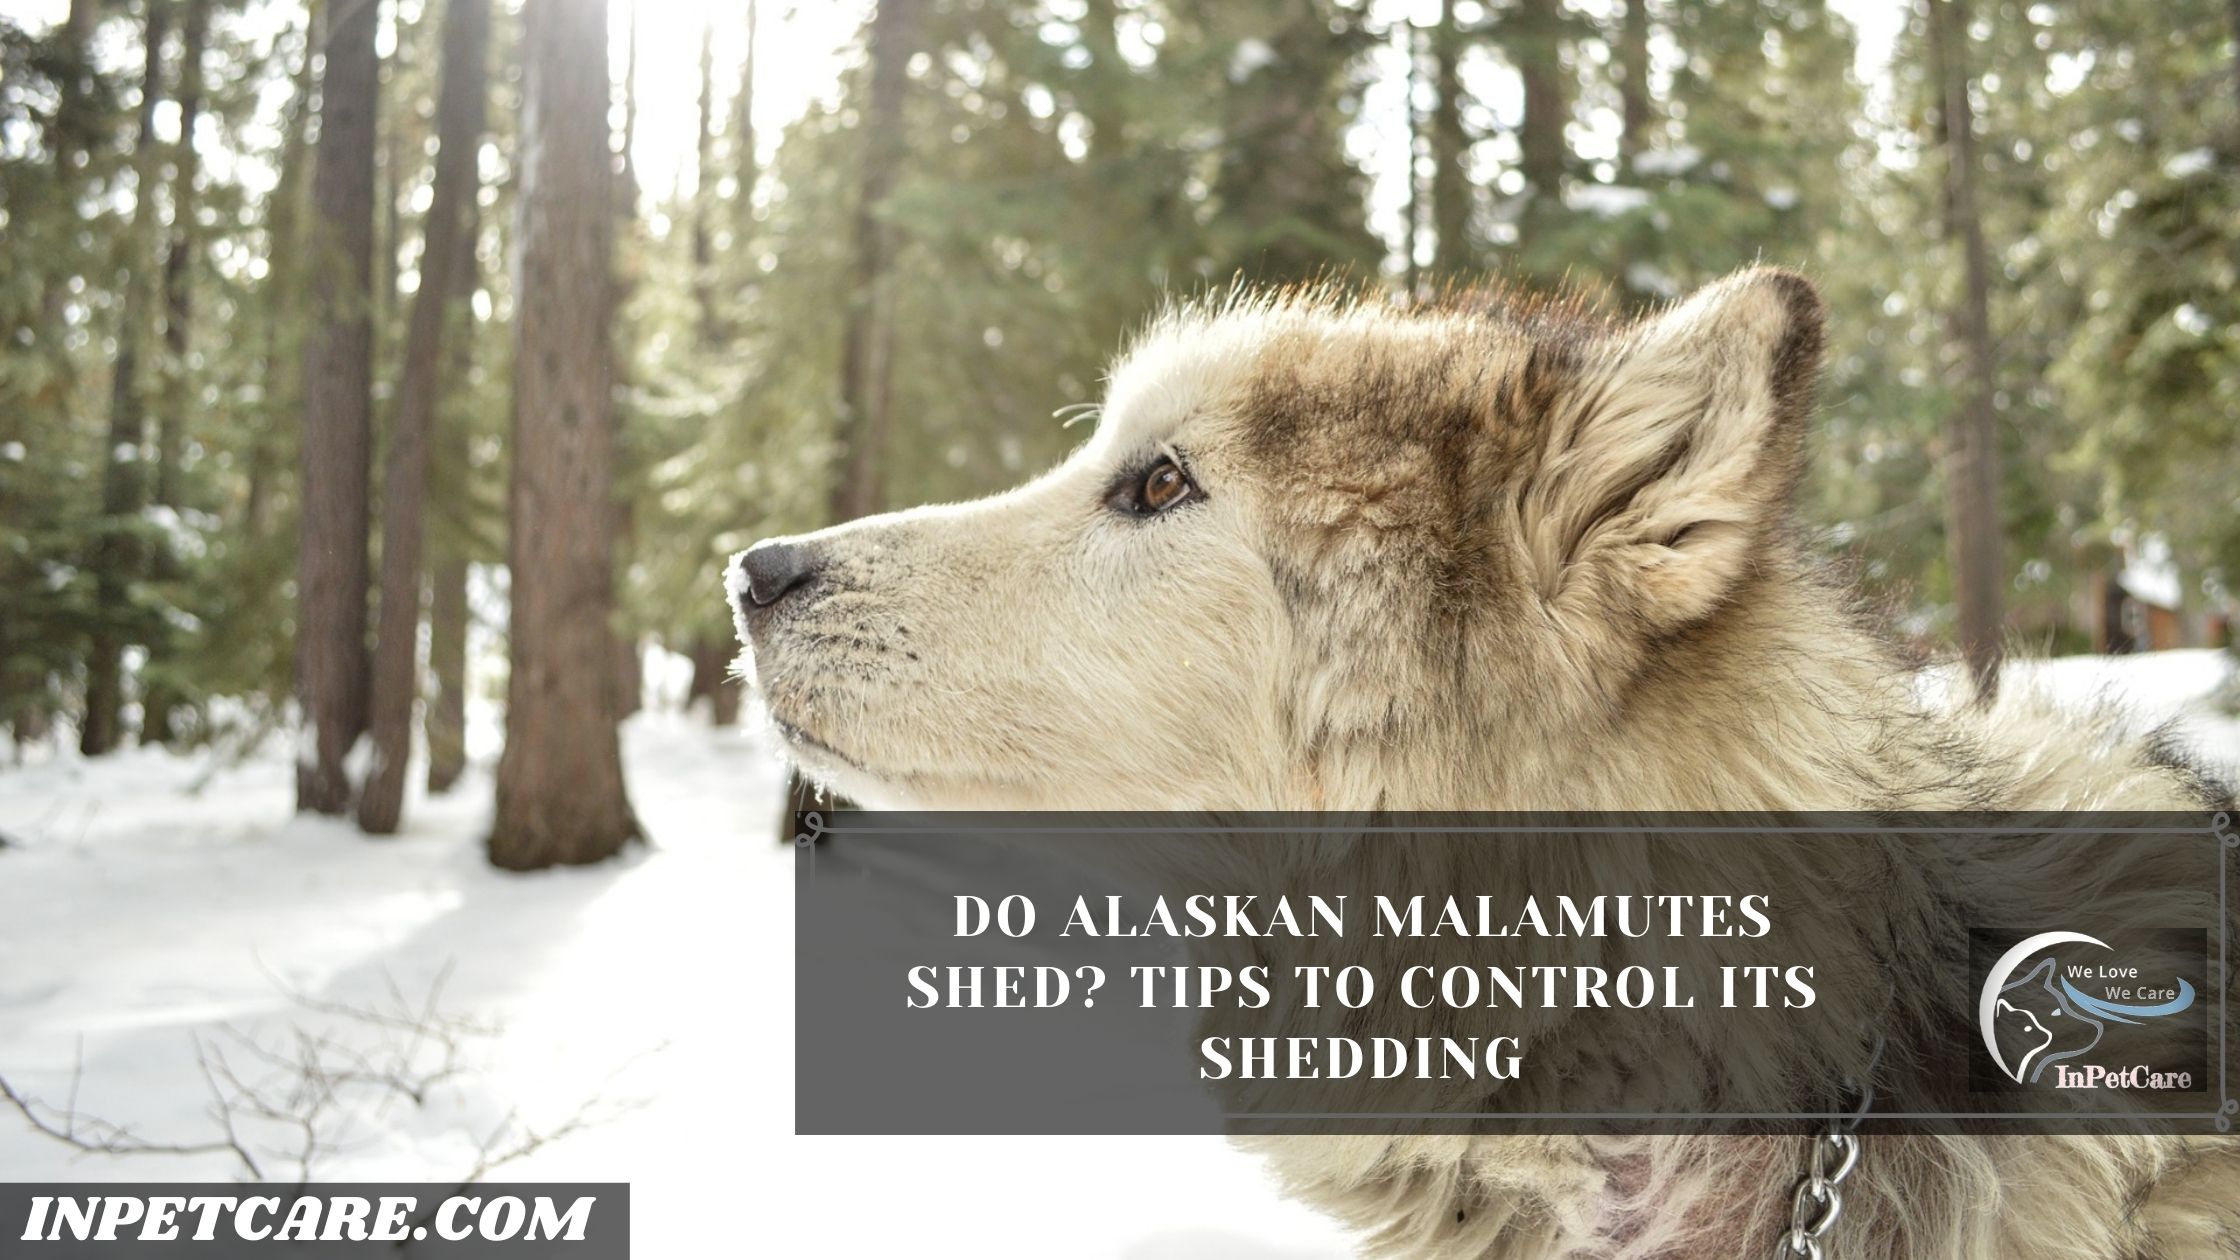 Do Alaskan Malamutes Shed? 10 Tips To Control